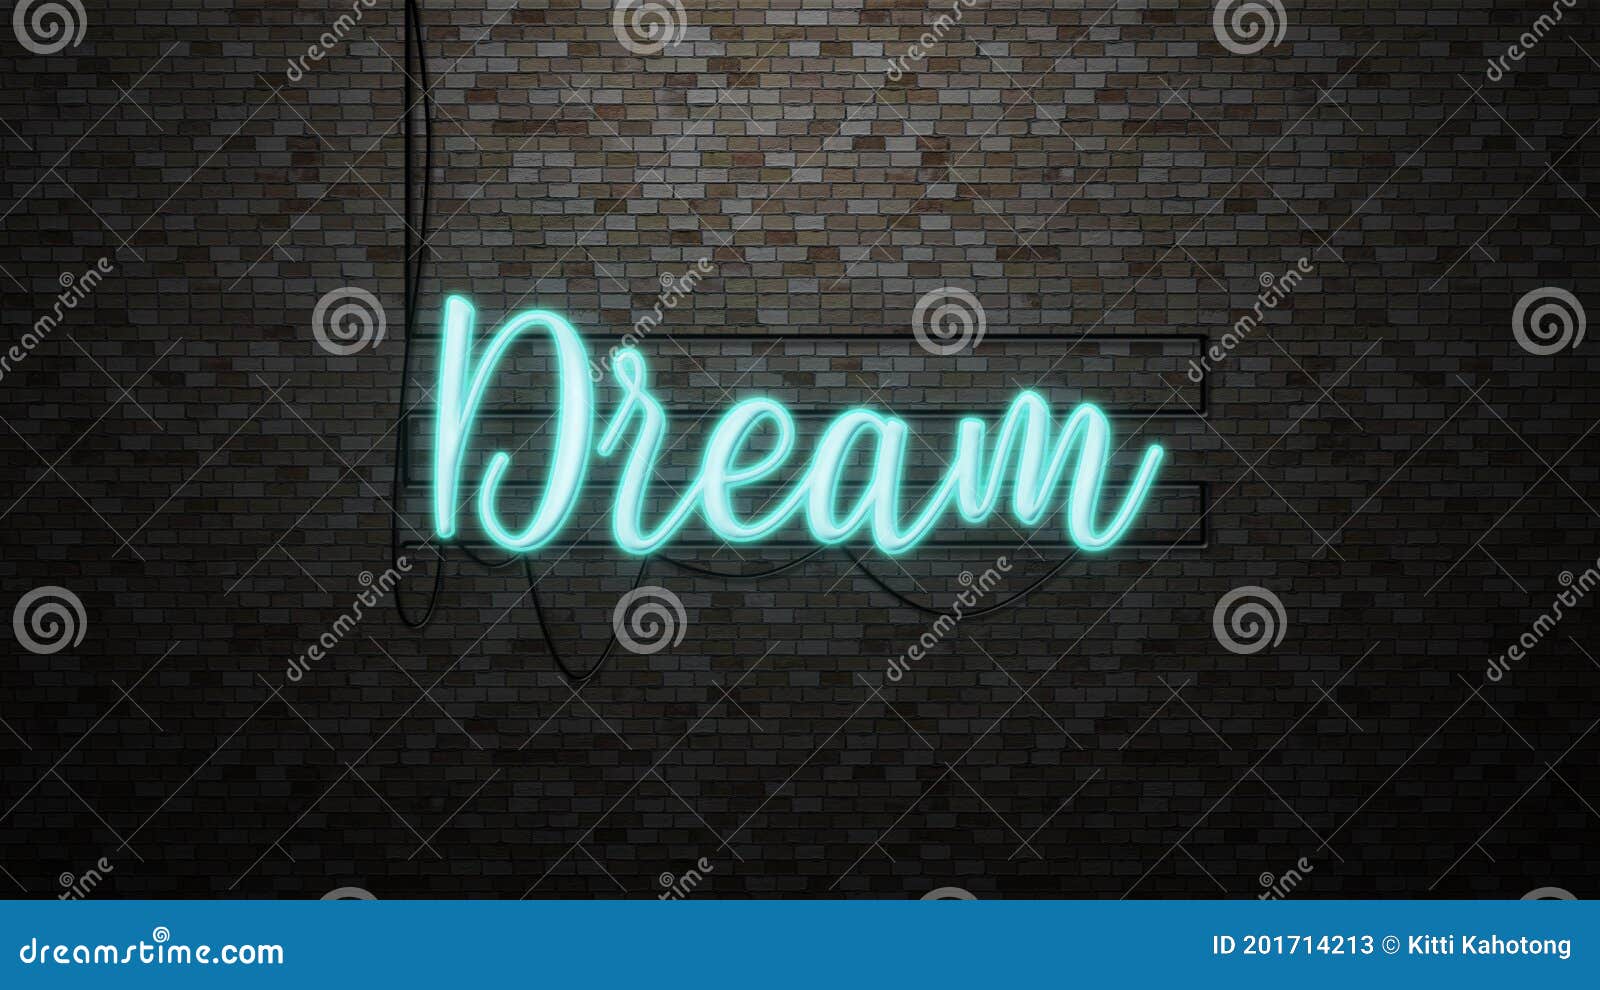 the message dream eon light on brick wall bcakground